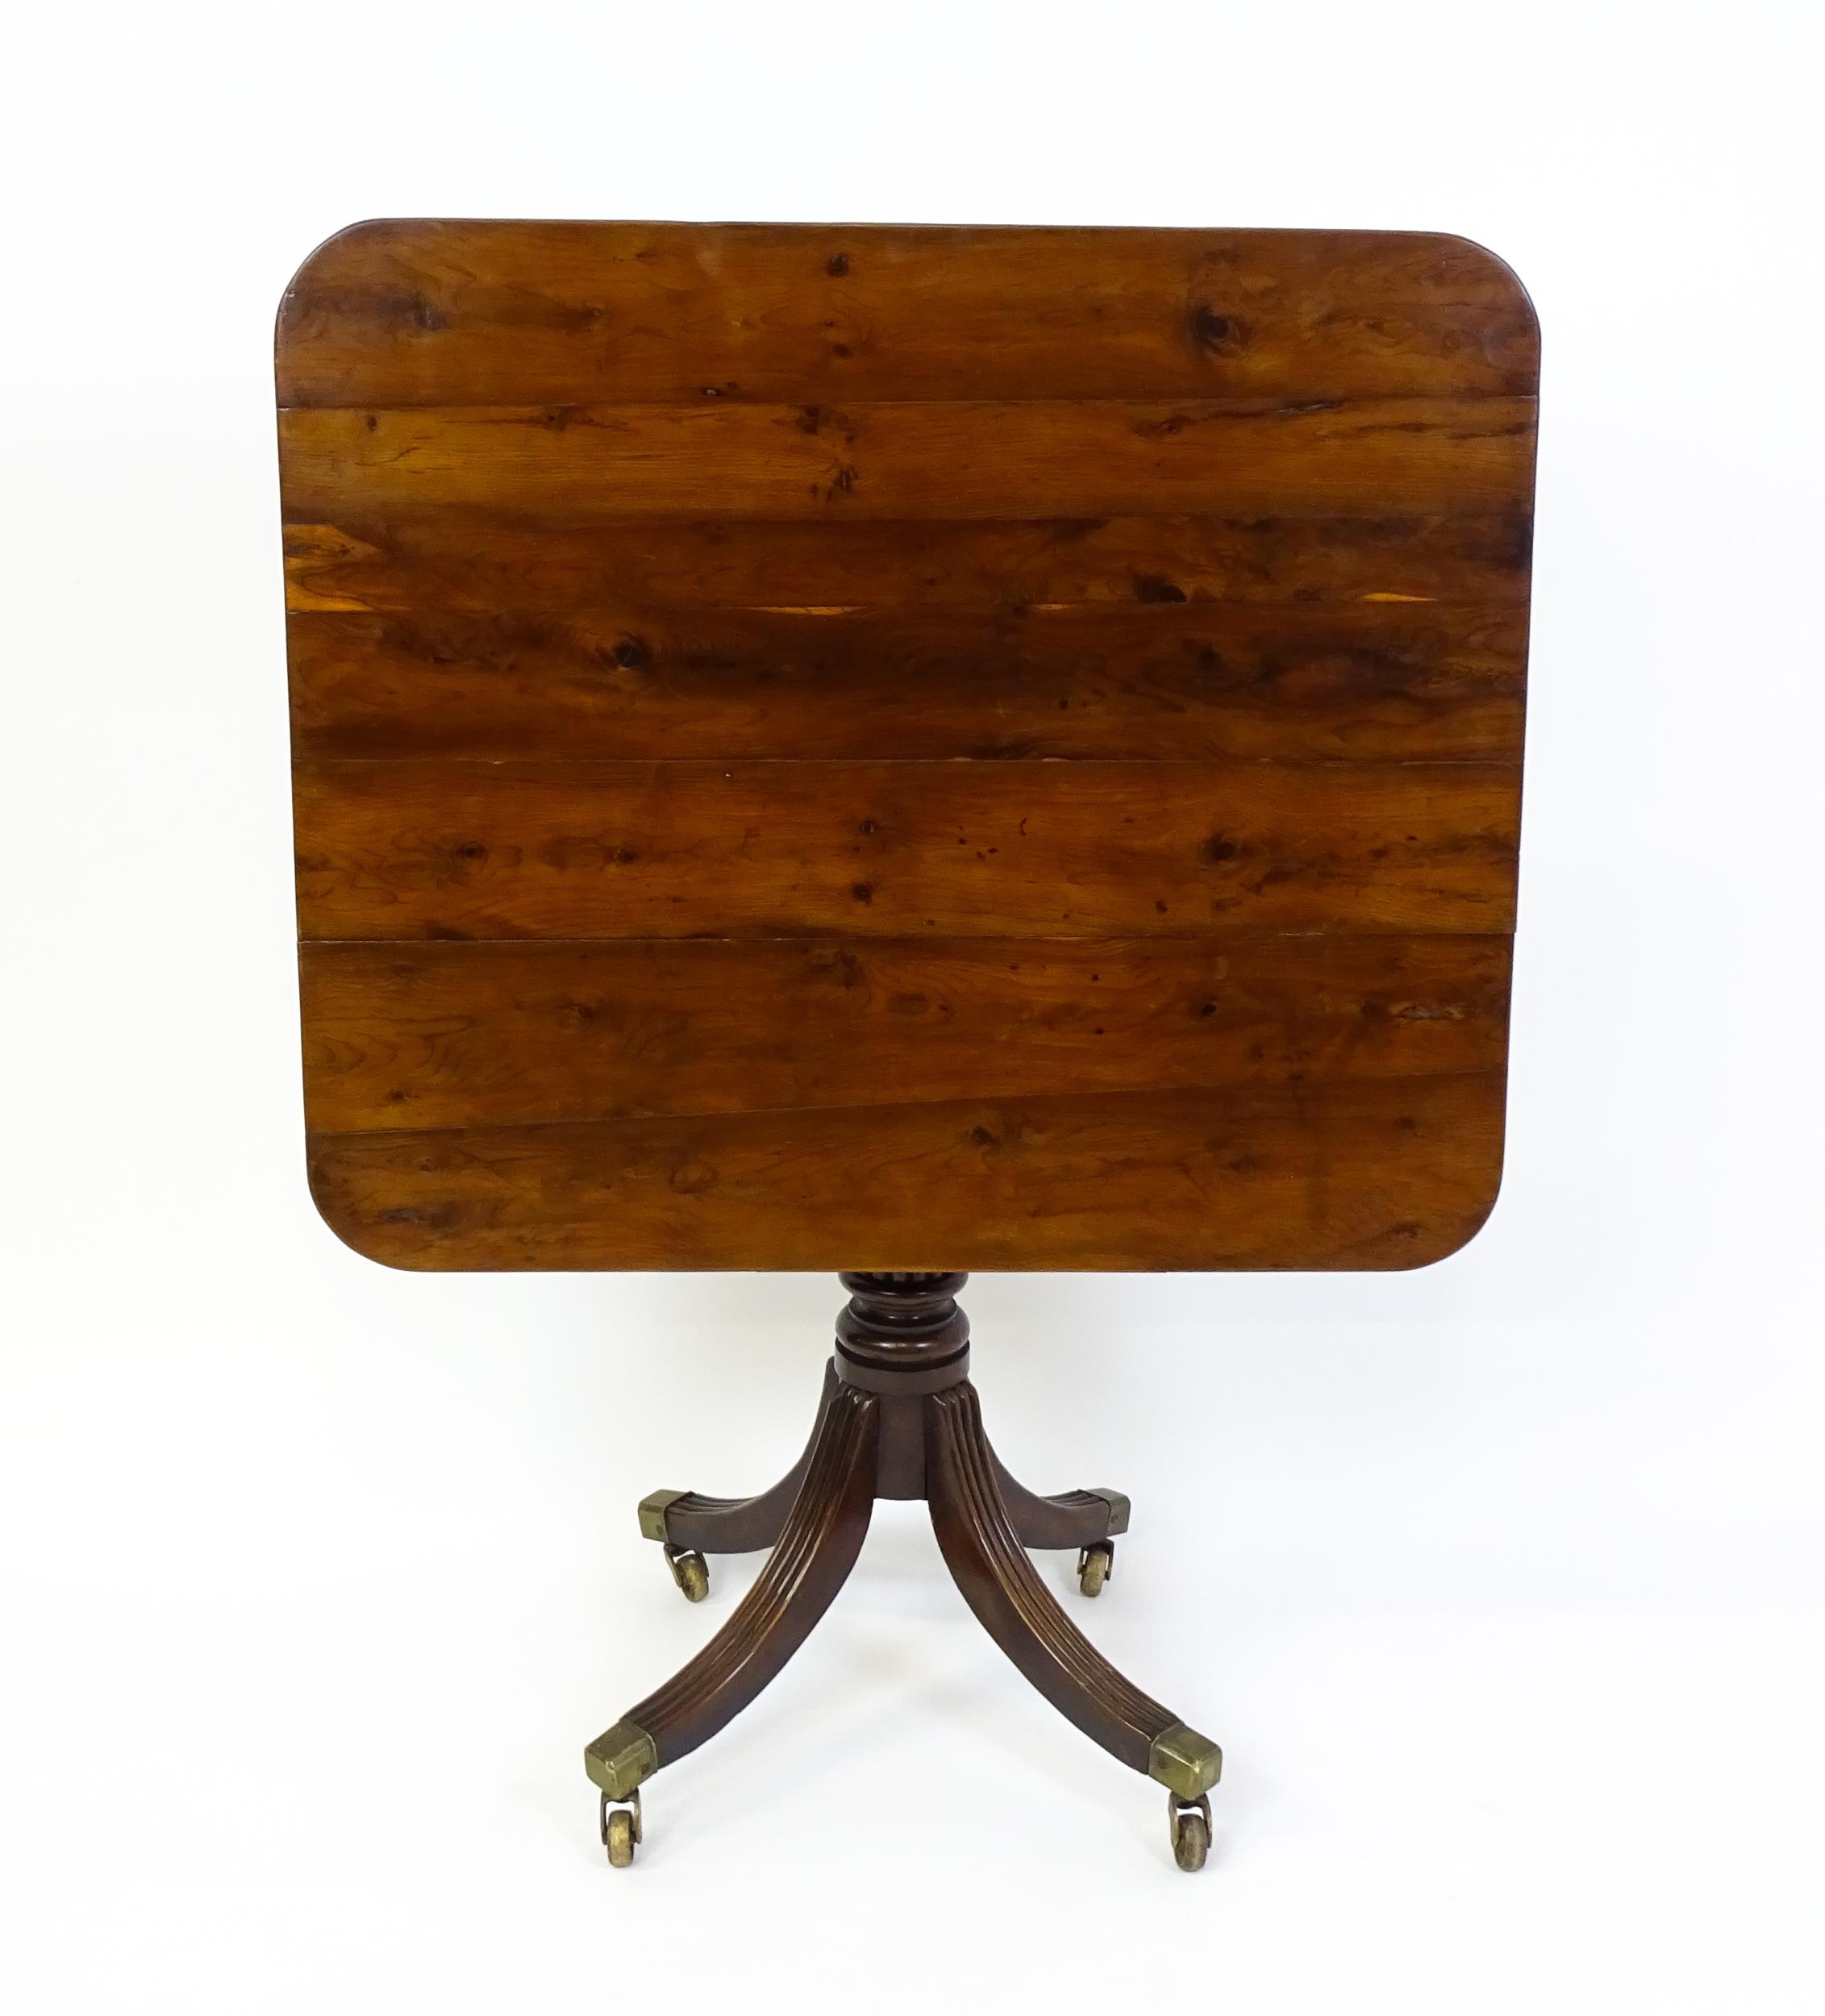 A 19thC tilt top occasional table with yew wood planked top above a reeded mahogany pedestal and - Image 8 of 13